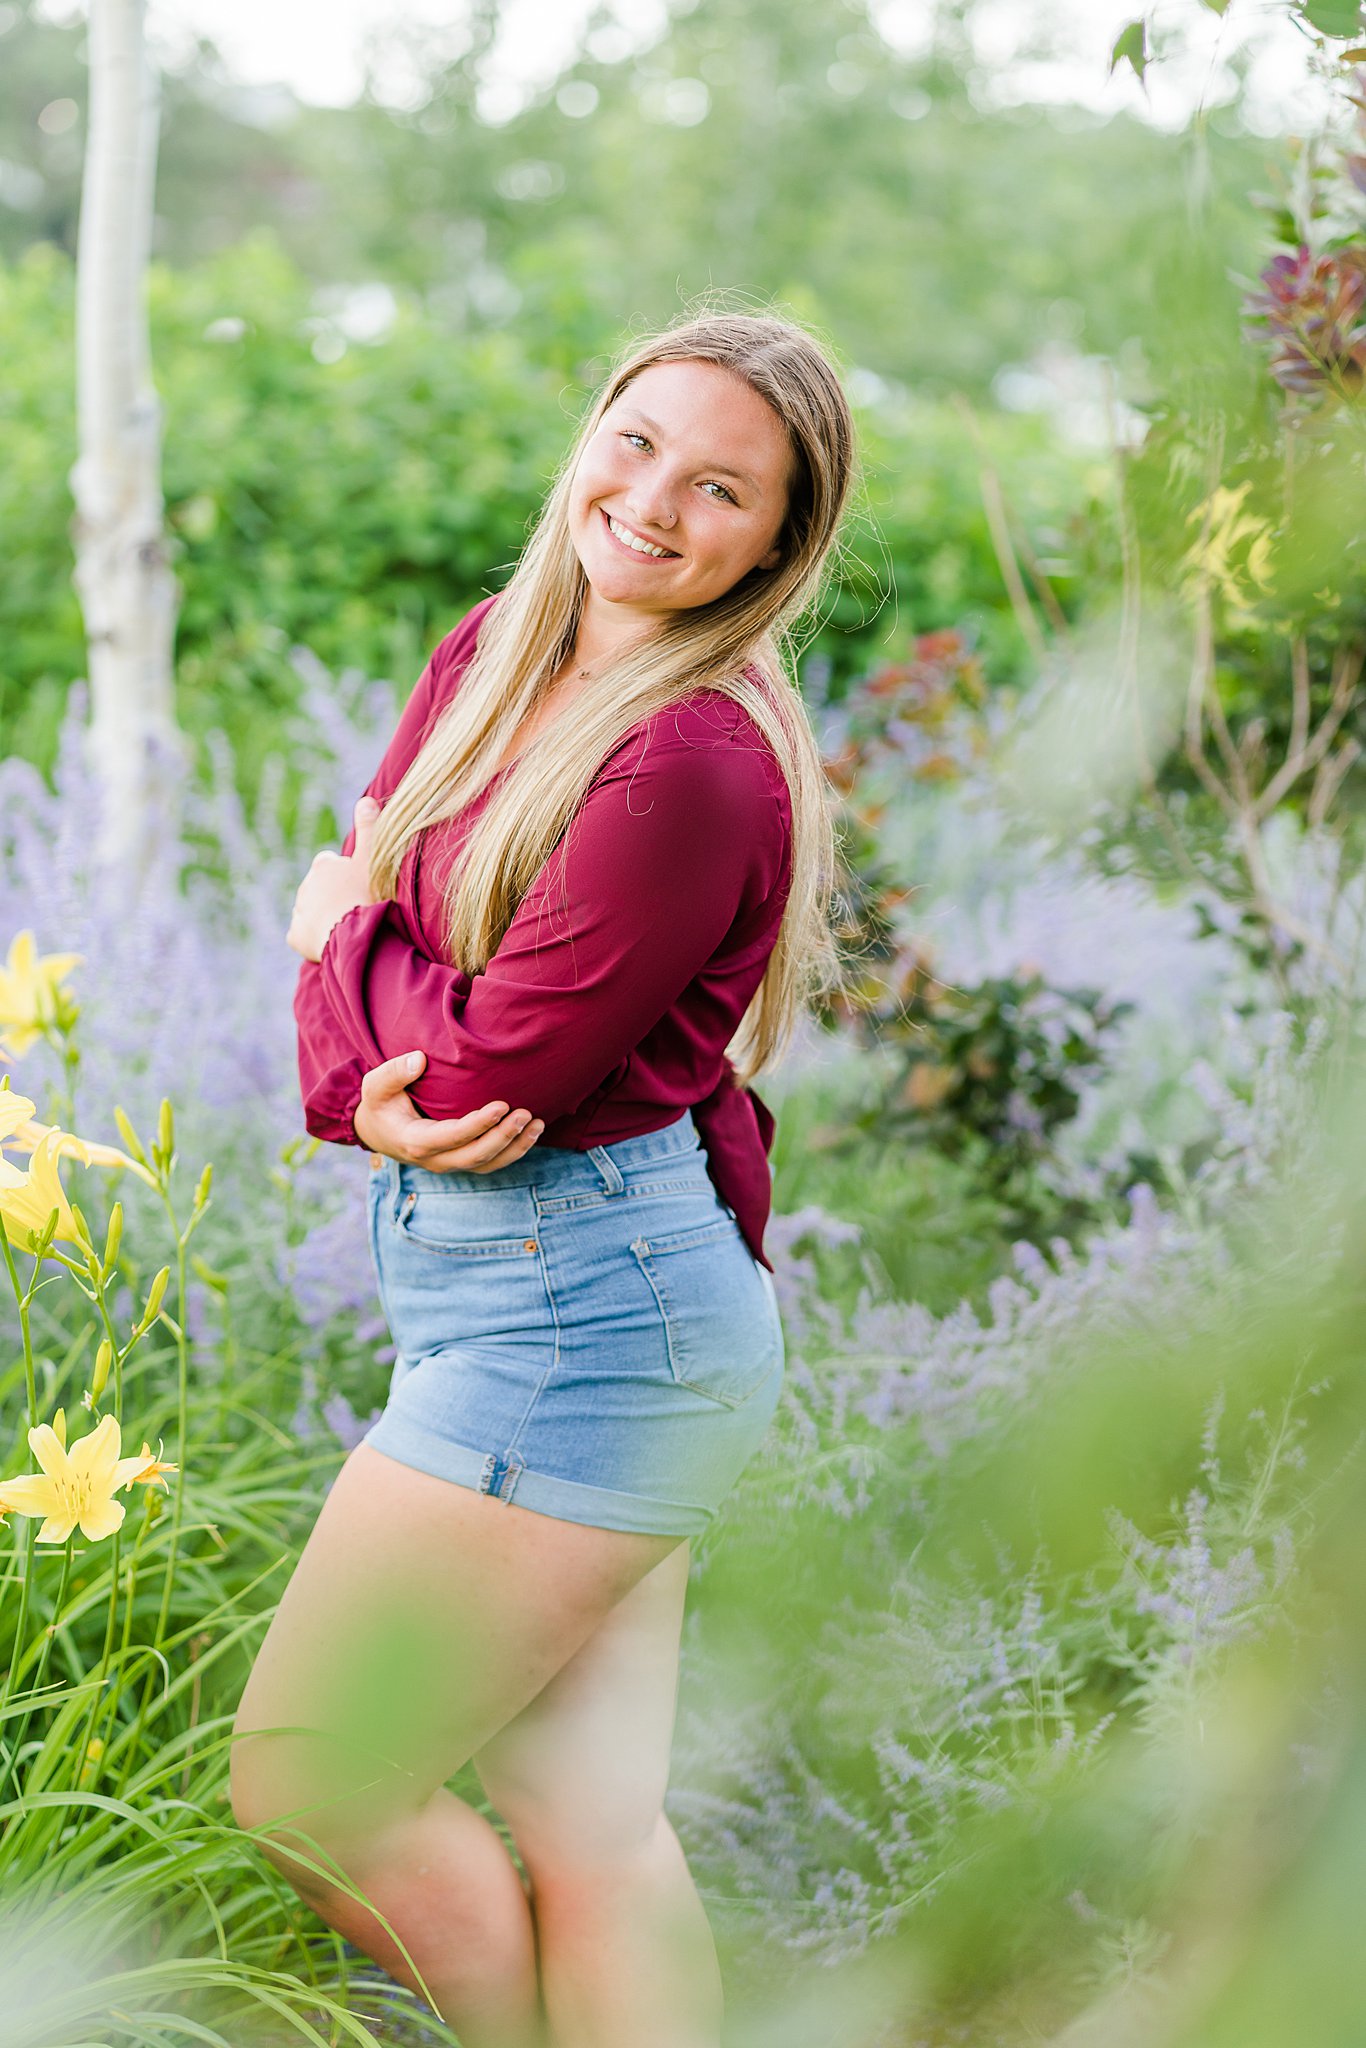 High school senior stands with arms crossed in a flower garden